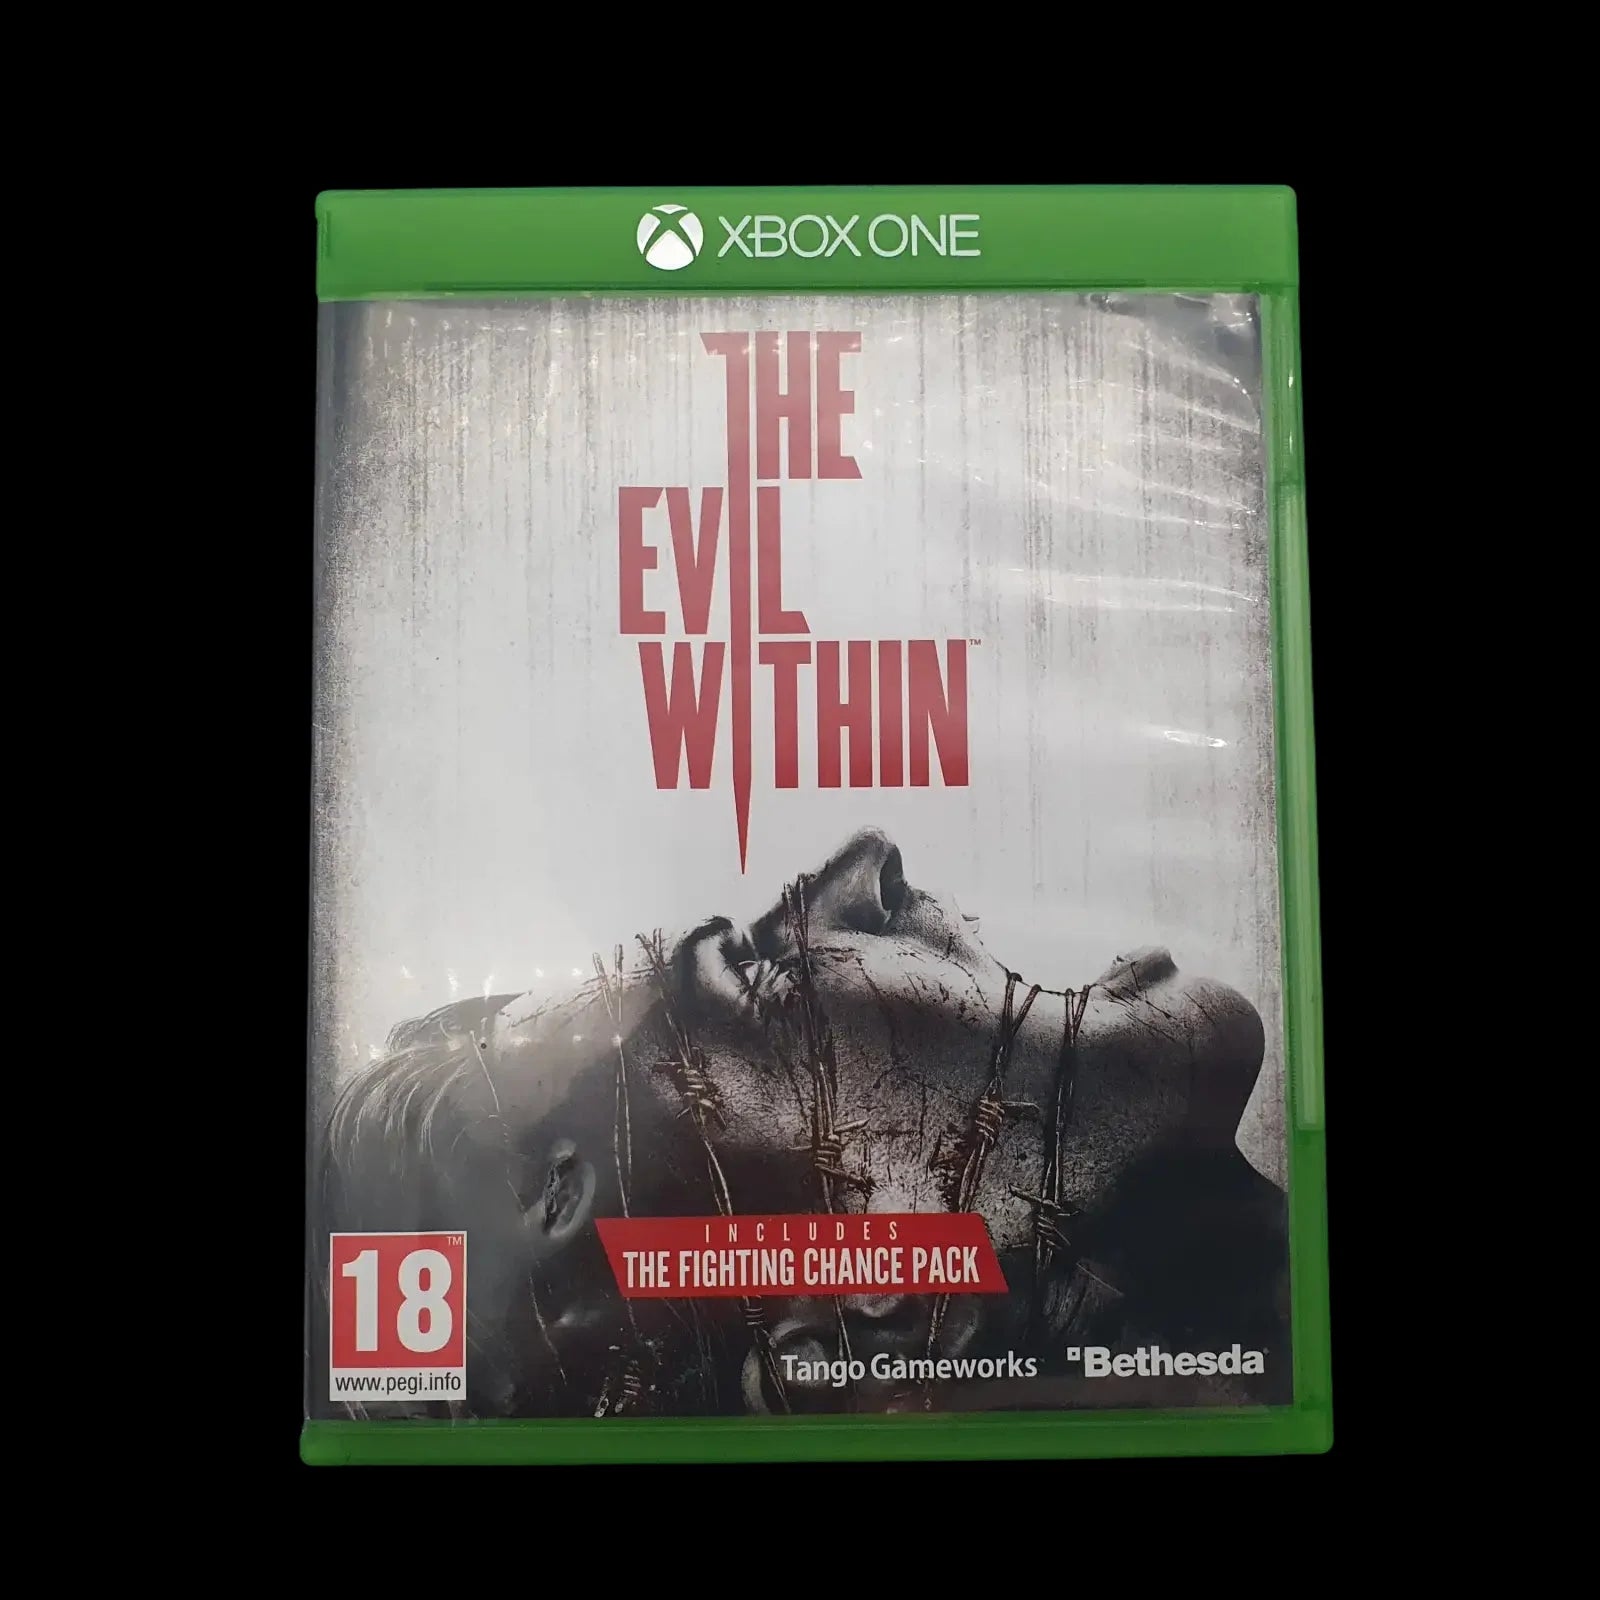 The Evil Within Microsoft Xbox One Bethesda 2014 Video Game